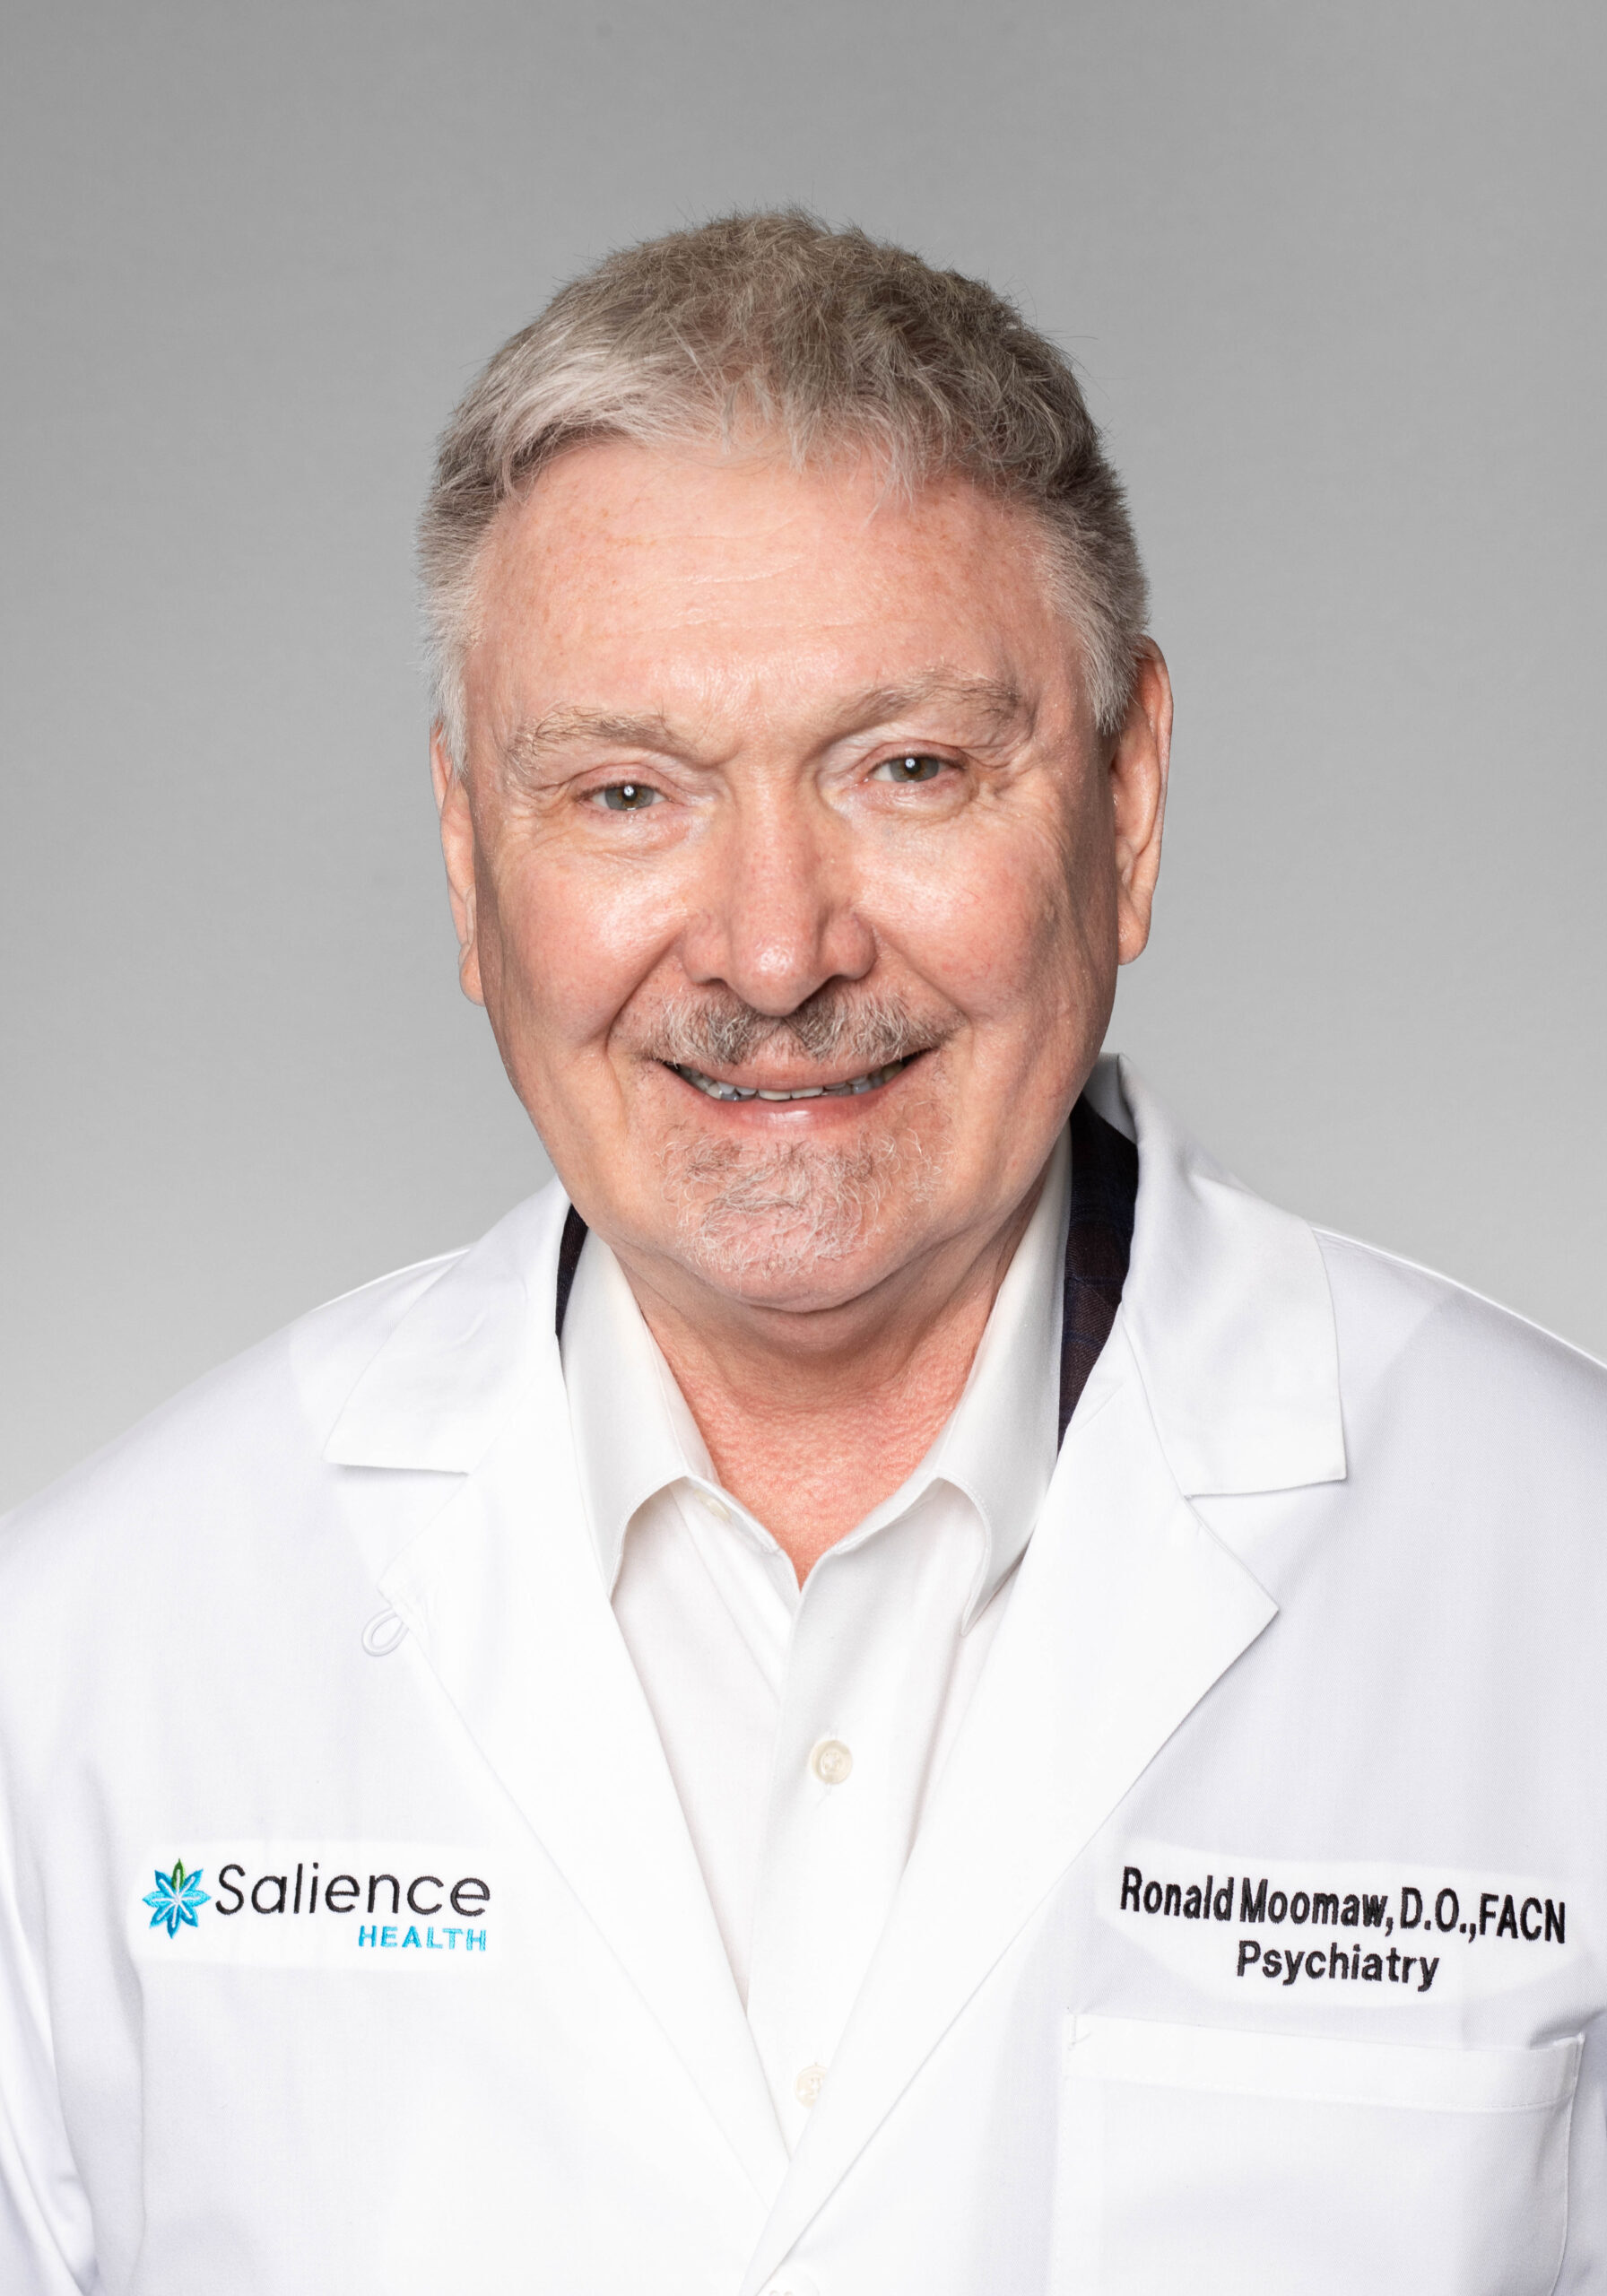 Dr. Ronald Moomaw - Adult Psychiatrist in Plano TX at Salience Health